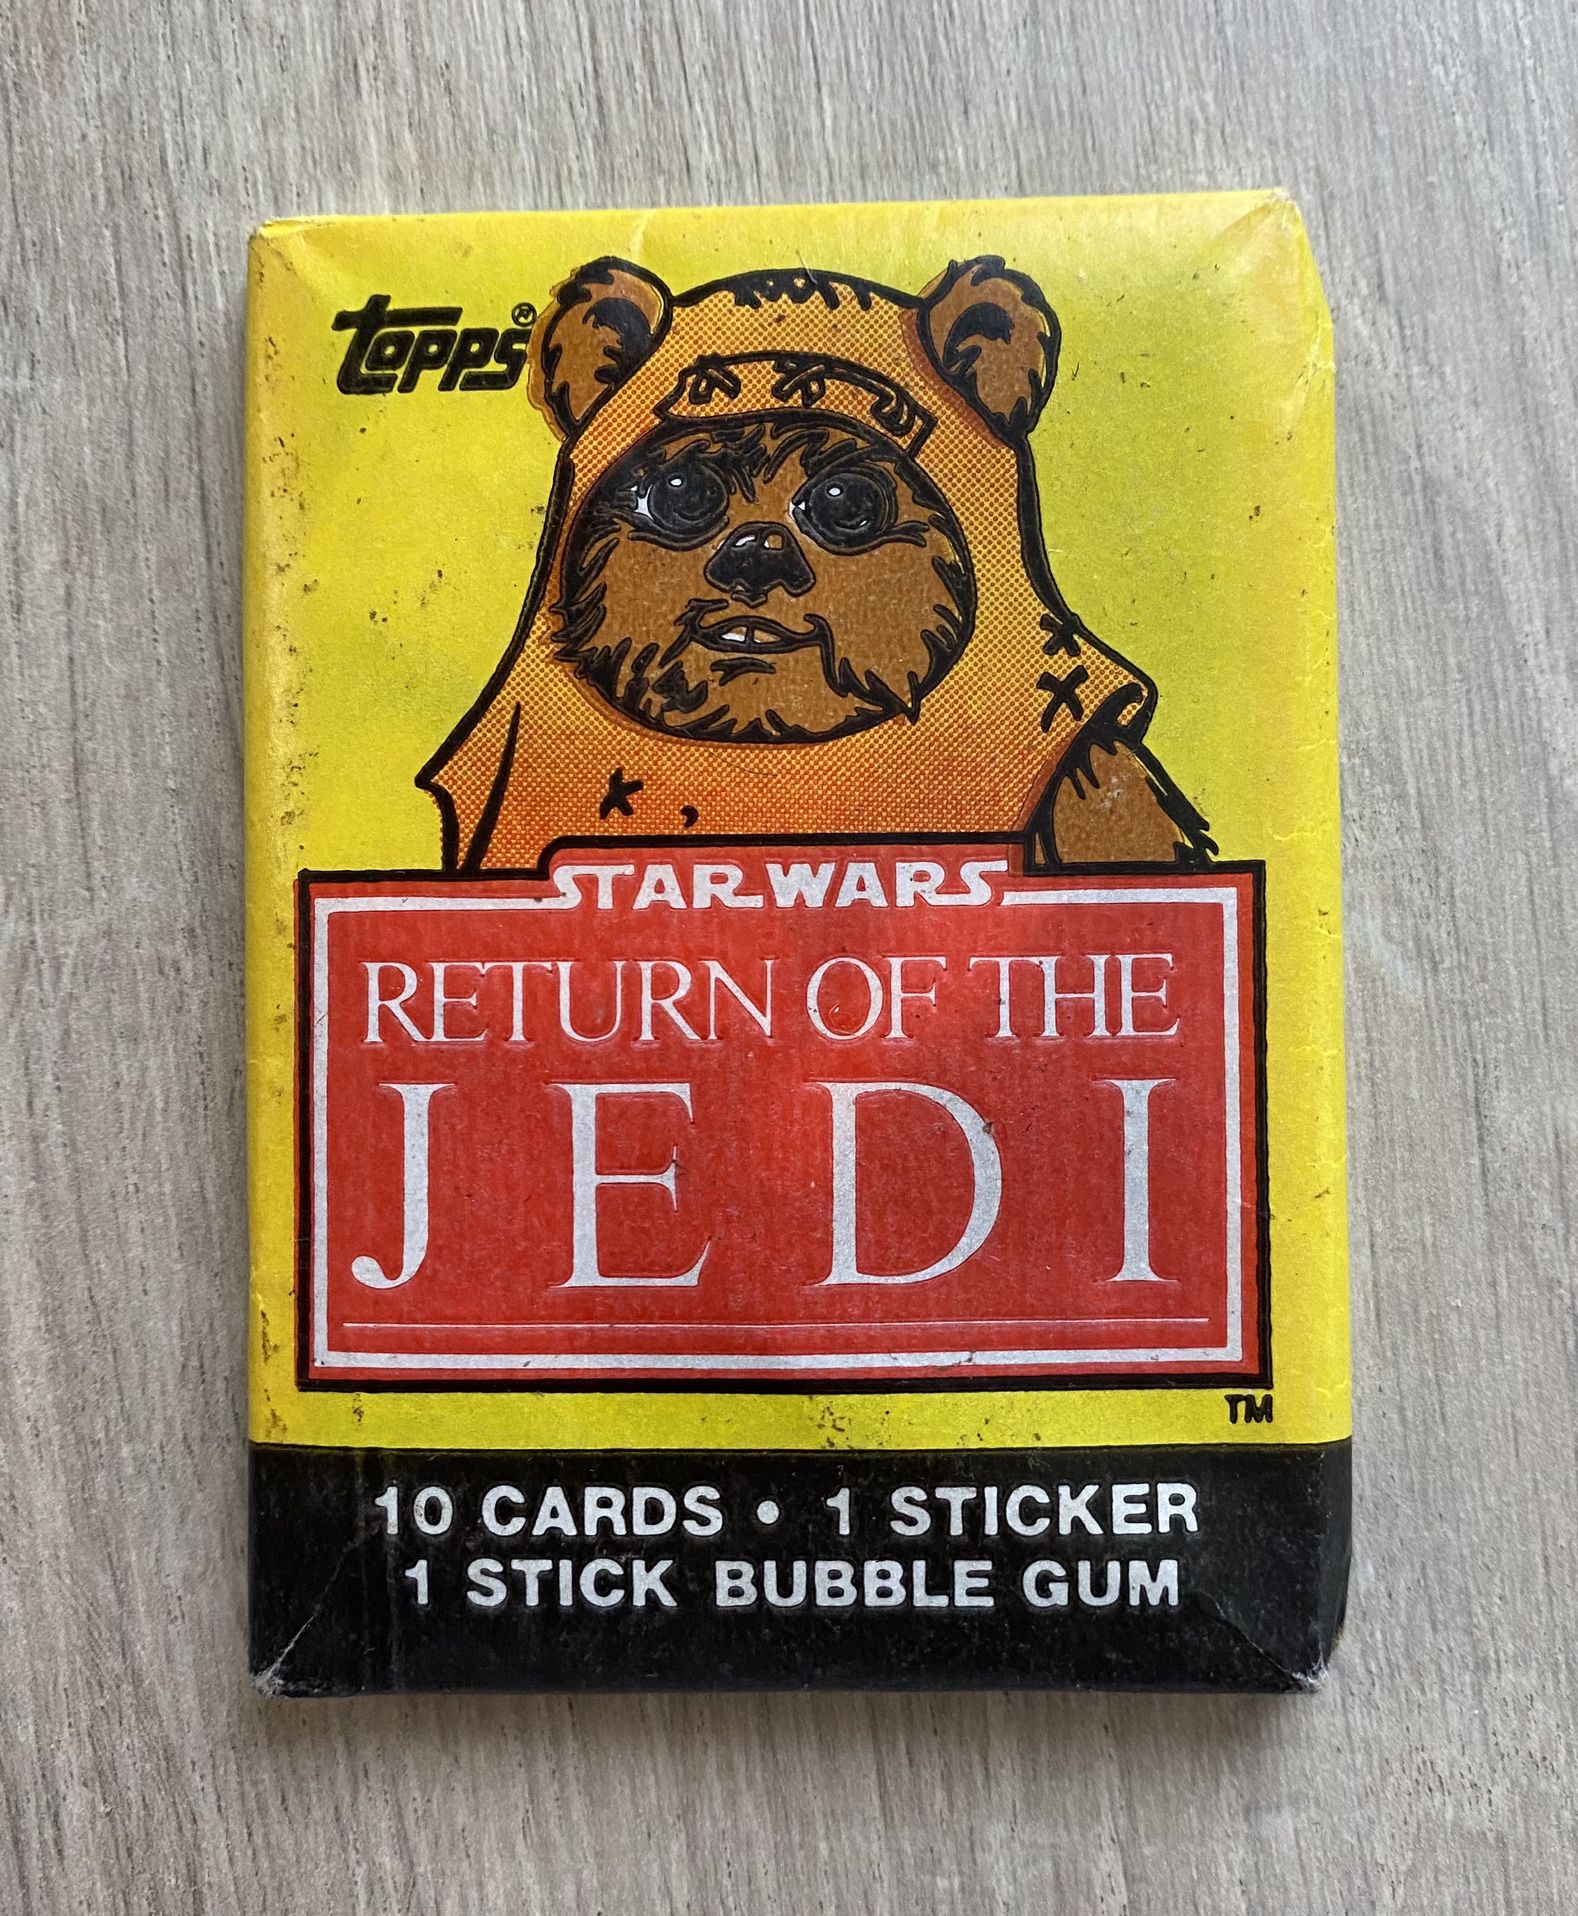 Star Wars Return of the Jedi Trading Cards